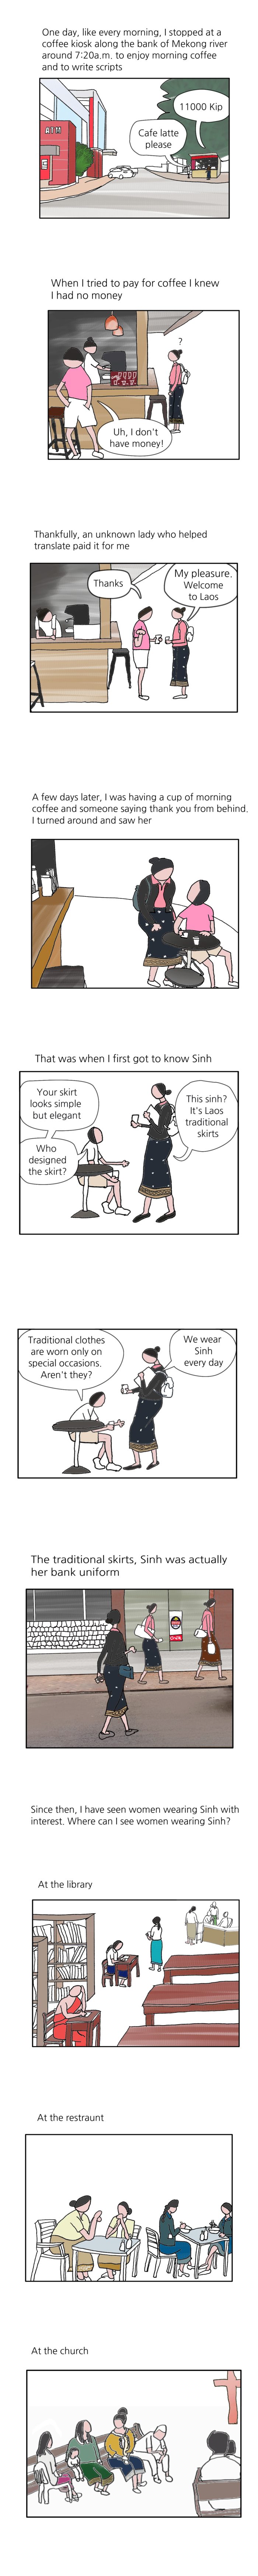 skyko comics about lao skirt called lao sinh-Do laos women really love to wear sinh?-page5 